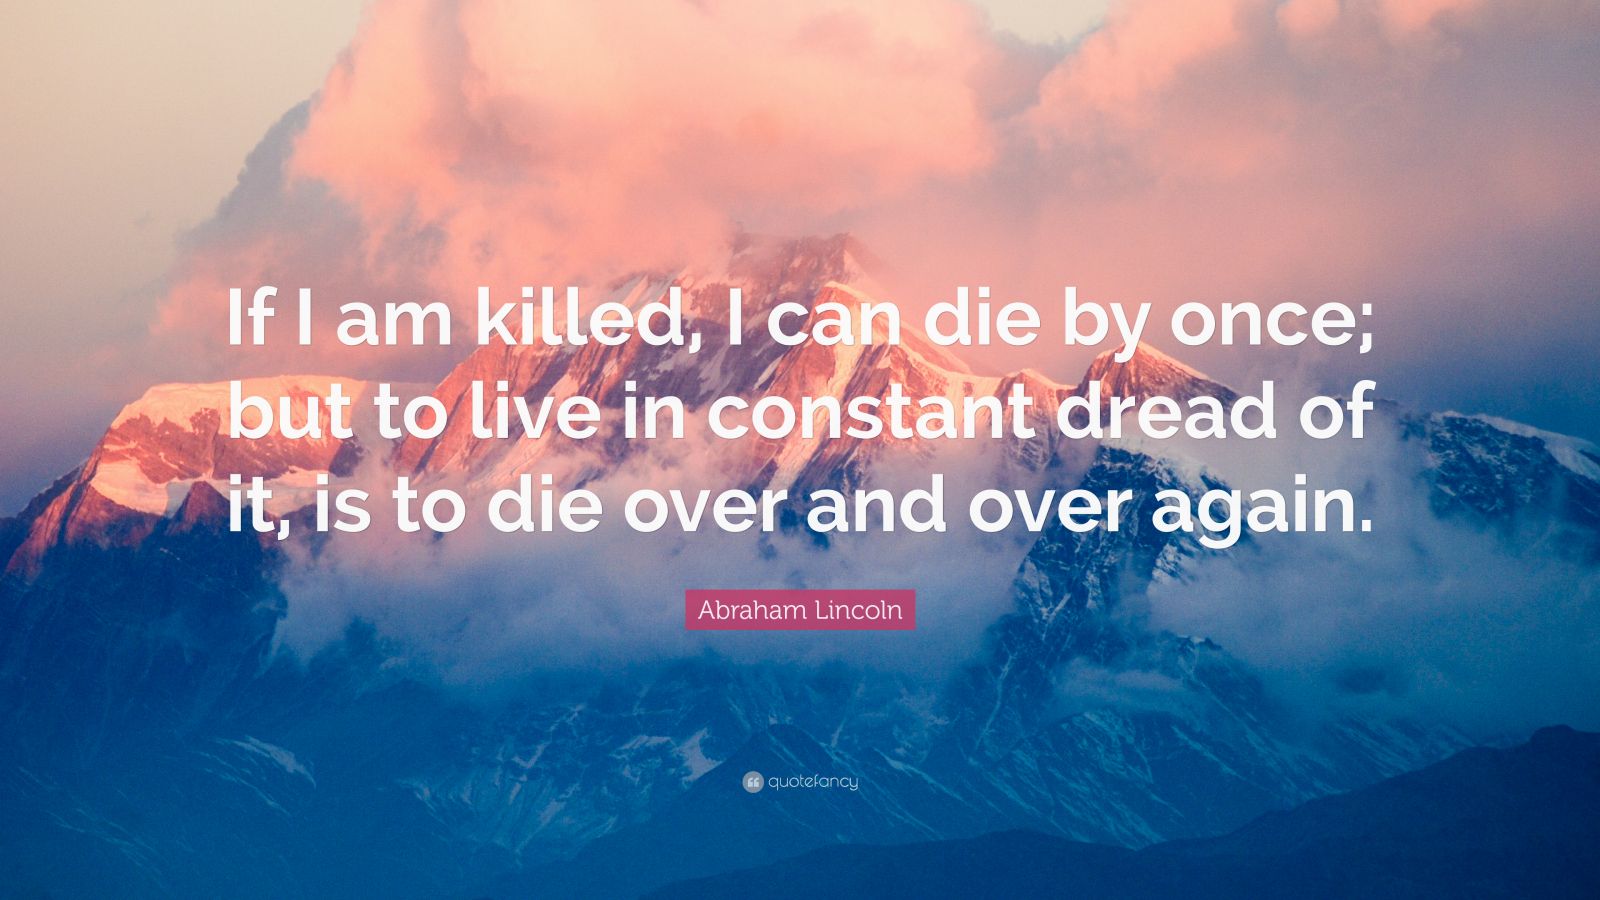 Abraham Lincoln Quote: “If I am killed, I can die by once; but to live ...